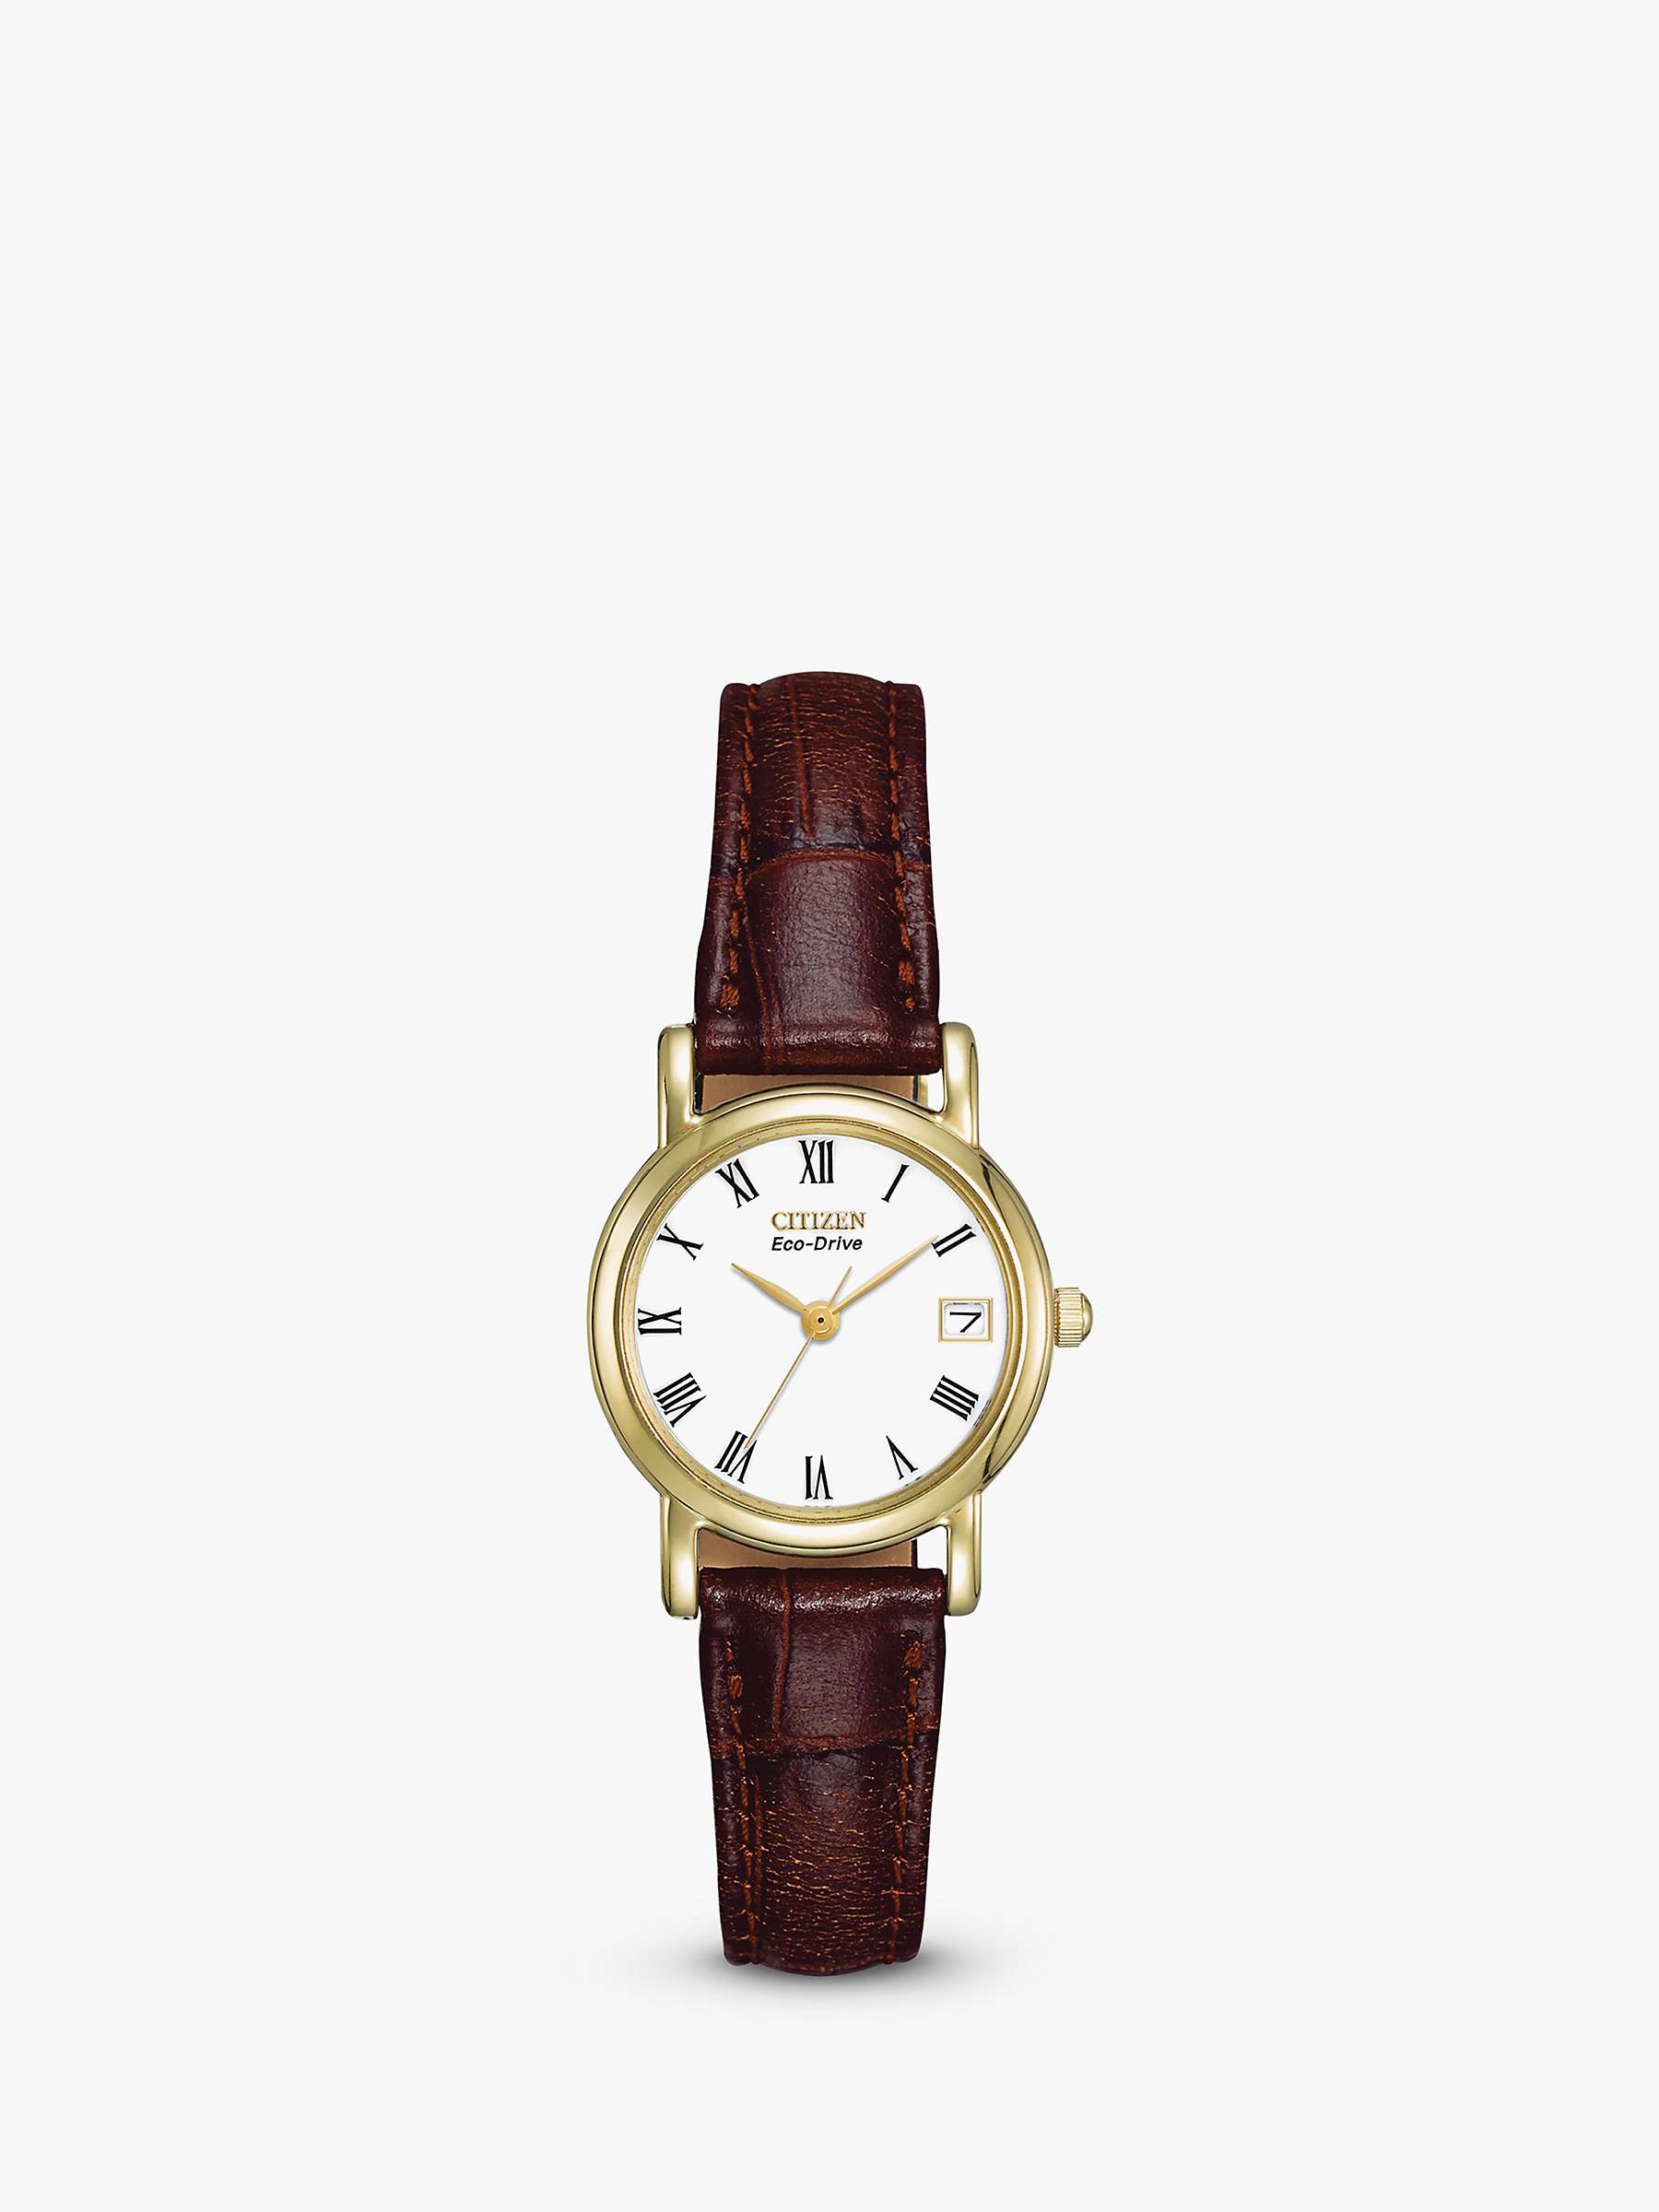 Buy Citizen EW1272-01B Women's Eco-Drive Leather Strap Watch, Brown/White Online at johnlewis.com